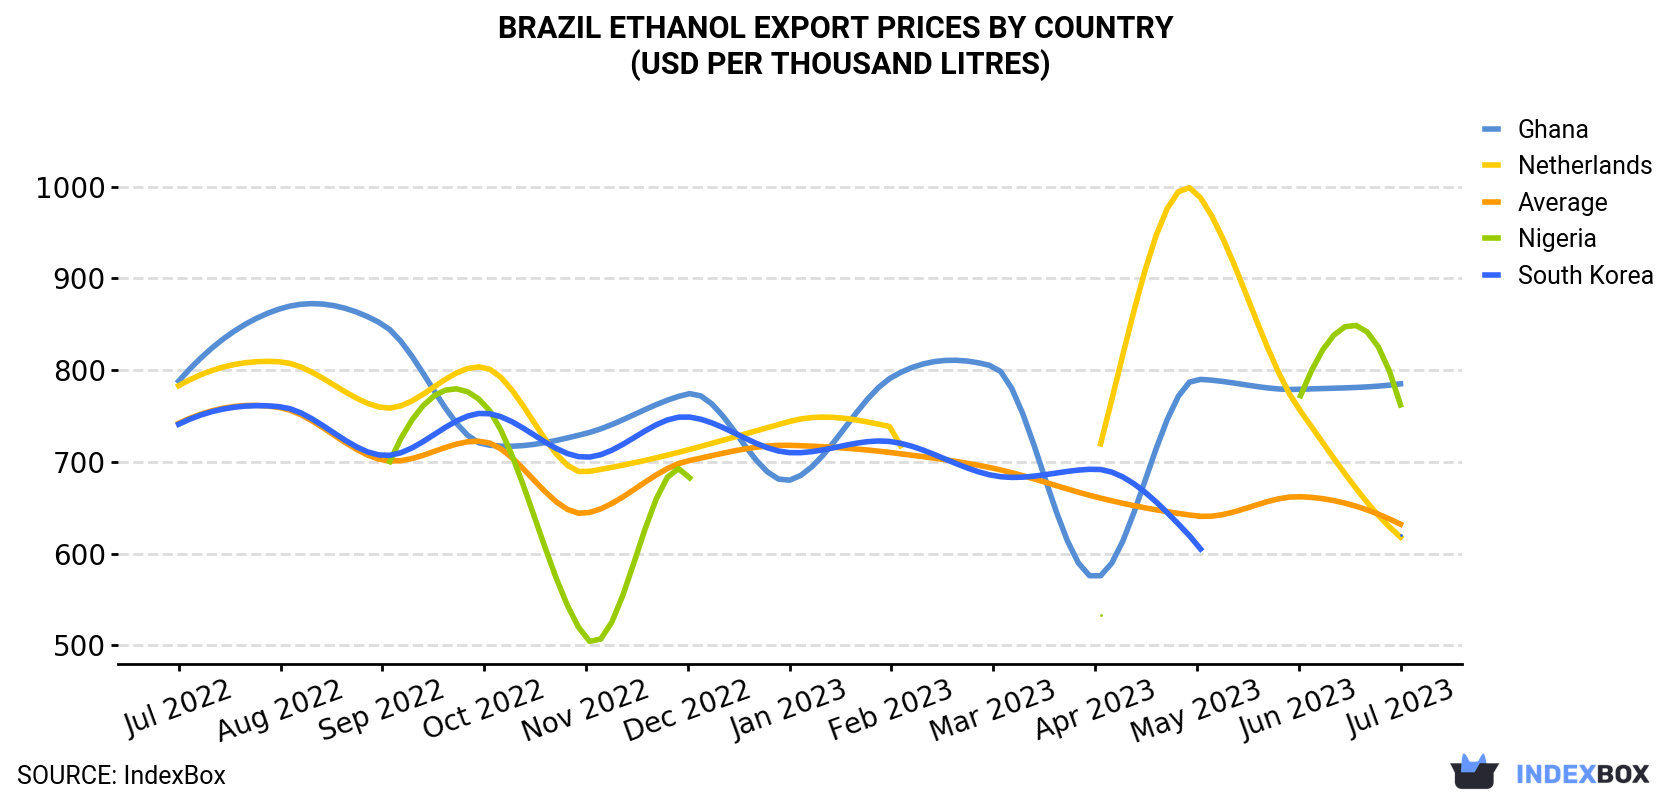 Brazil Ethanol Export Prices By Country (USD Per Thousand Litres)